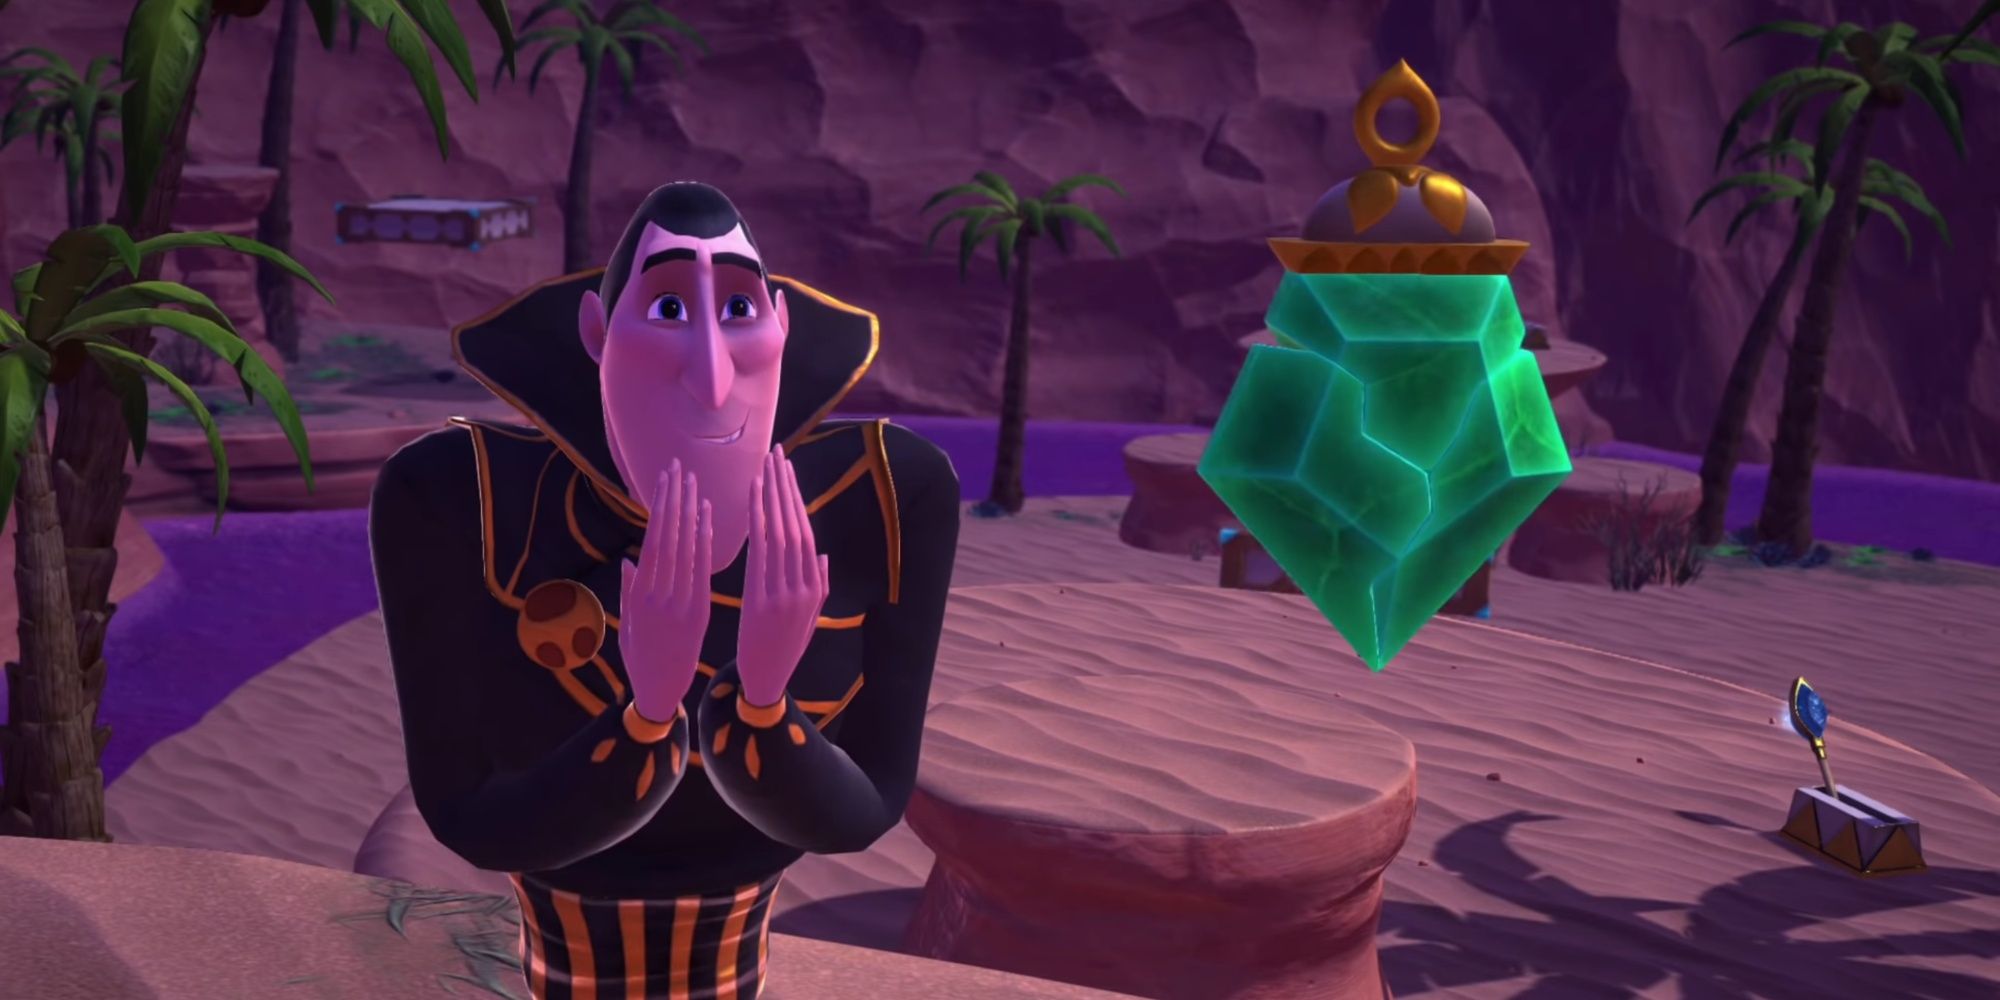 Dracula has his chin covered and his hands up as he gazes at the green jewel in a desert landscape.